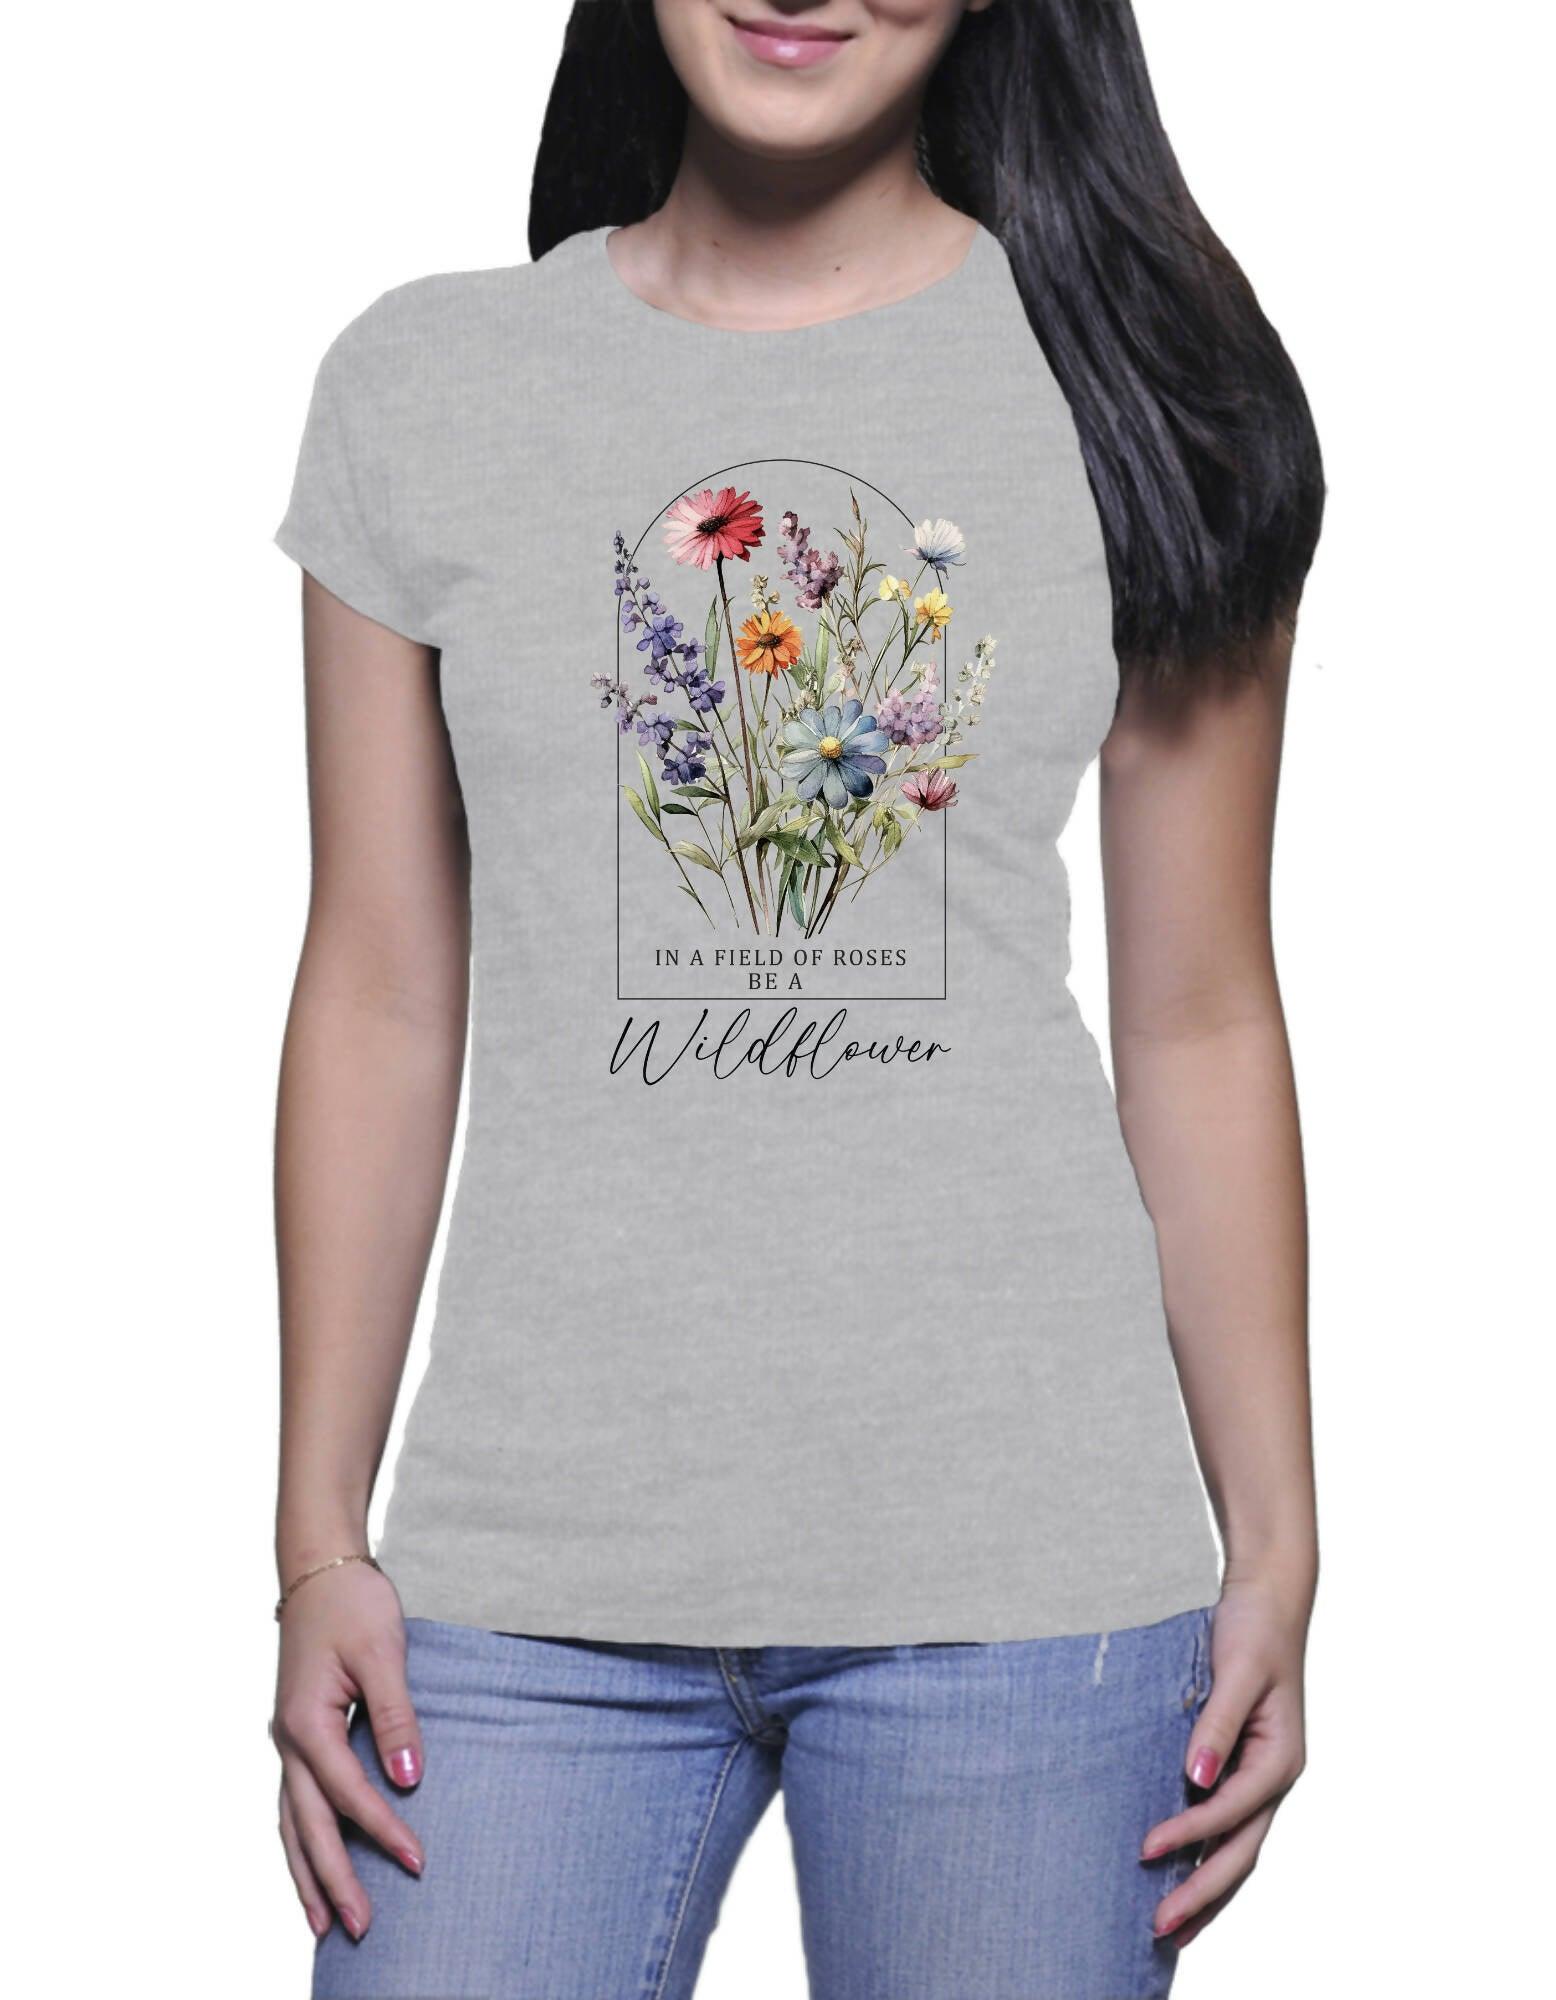 In a Field of Roses, Be a Wildflower" - ladies shirt (Fugg)